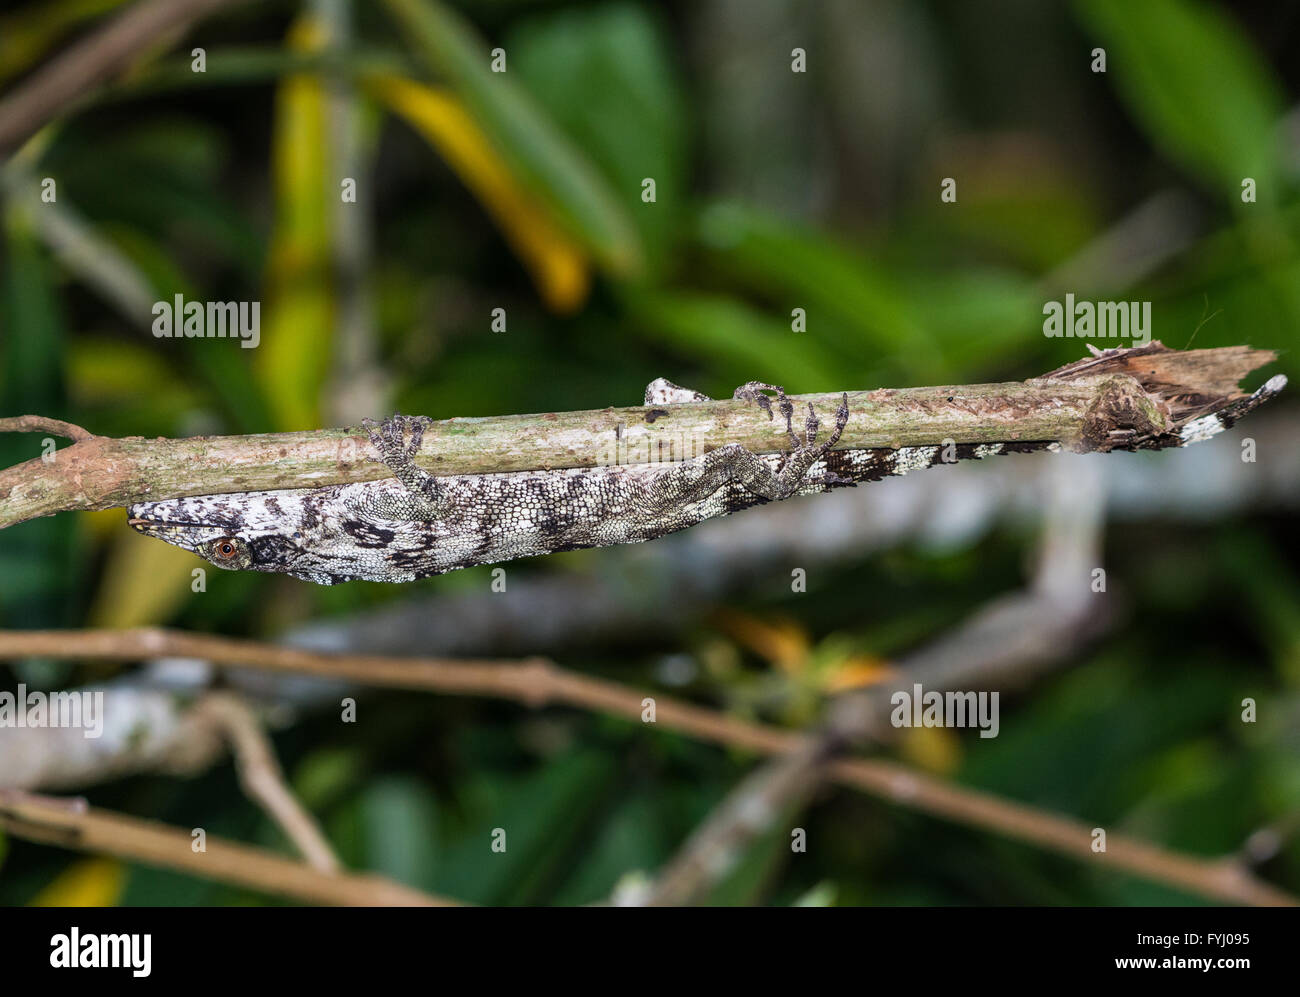 A Jamaican Trig Anole (Anolis valencienni) trying to camouflage behind a twig. Jamaica, Caribbeans. Stock Photo